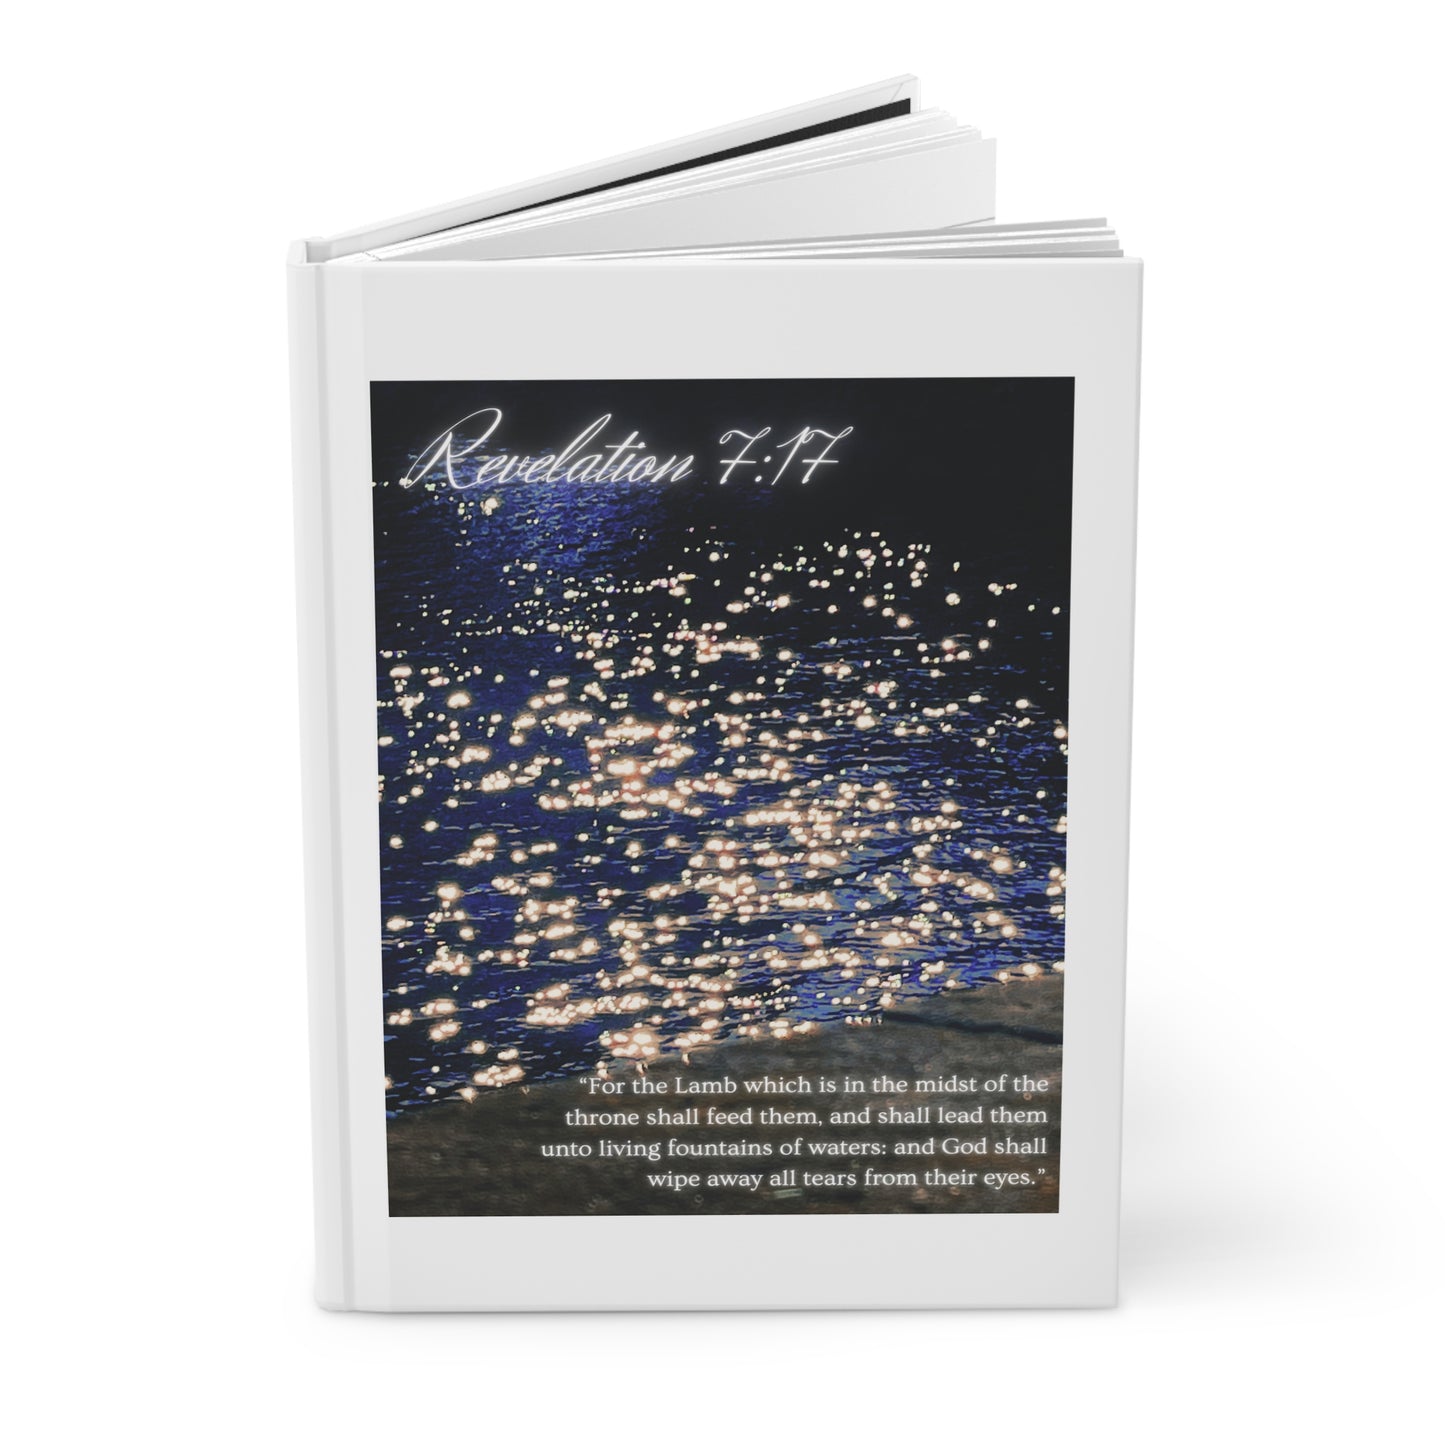 "LEAD THEM UNTO LIVING FOUNTAINS OF WATERS", Hardcover Journal, Revelation 7:17 Candle Lumination Kingdom Print